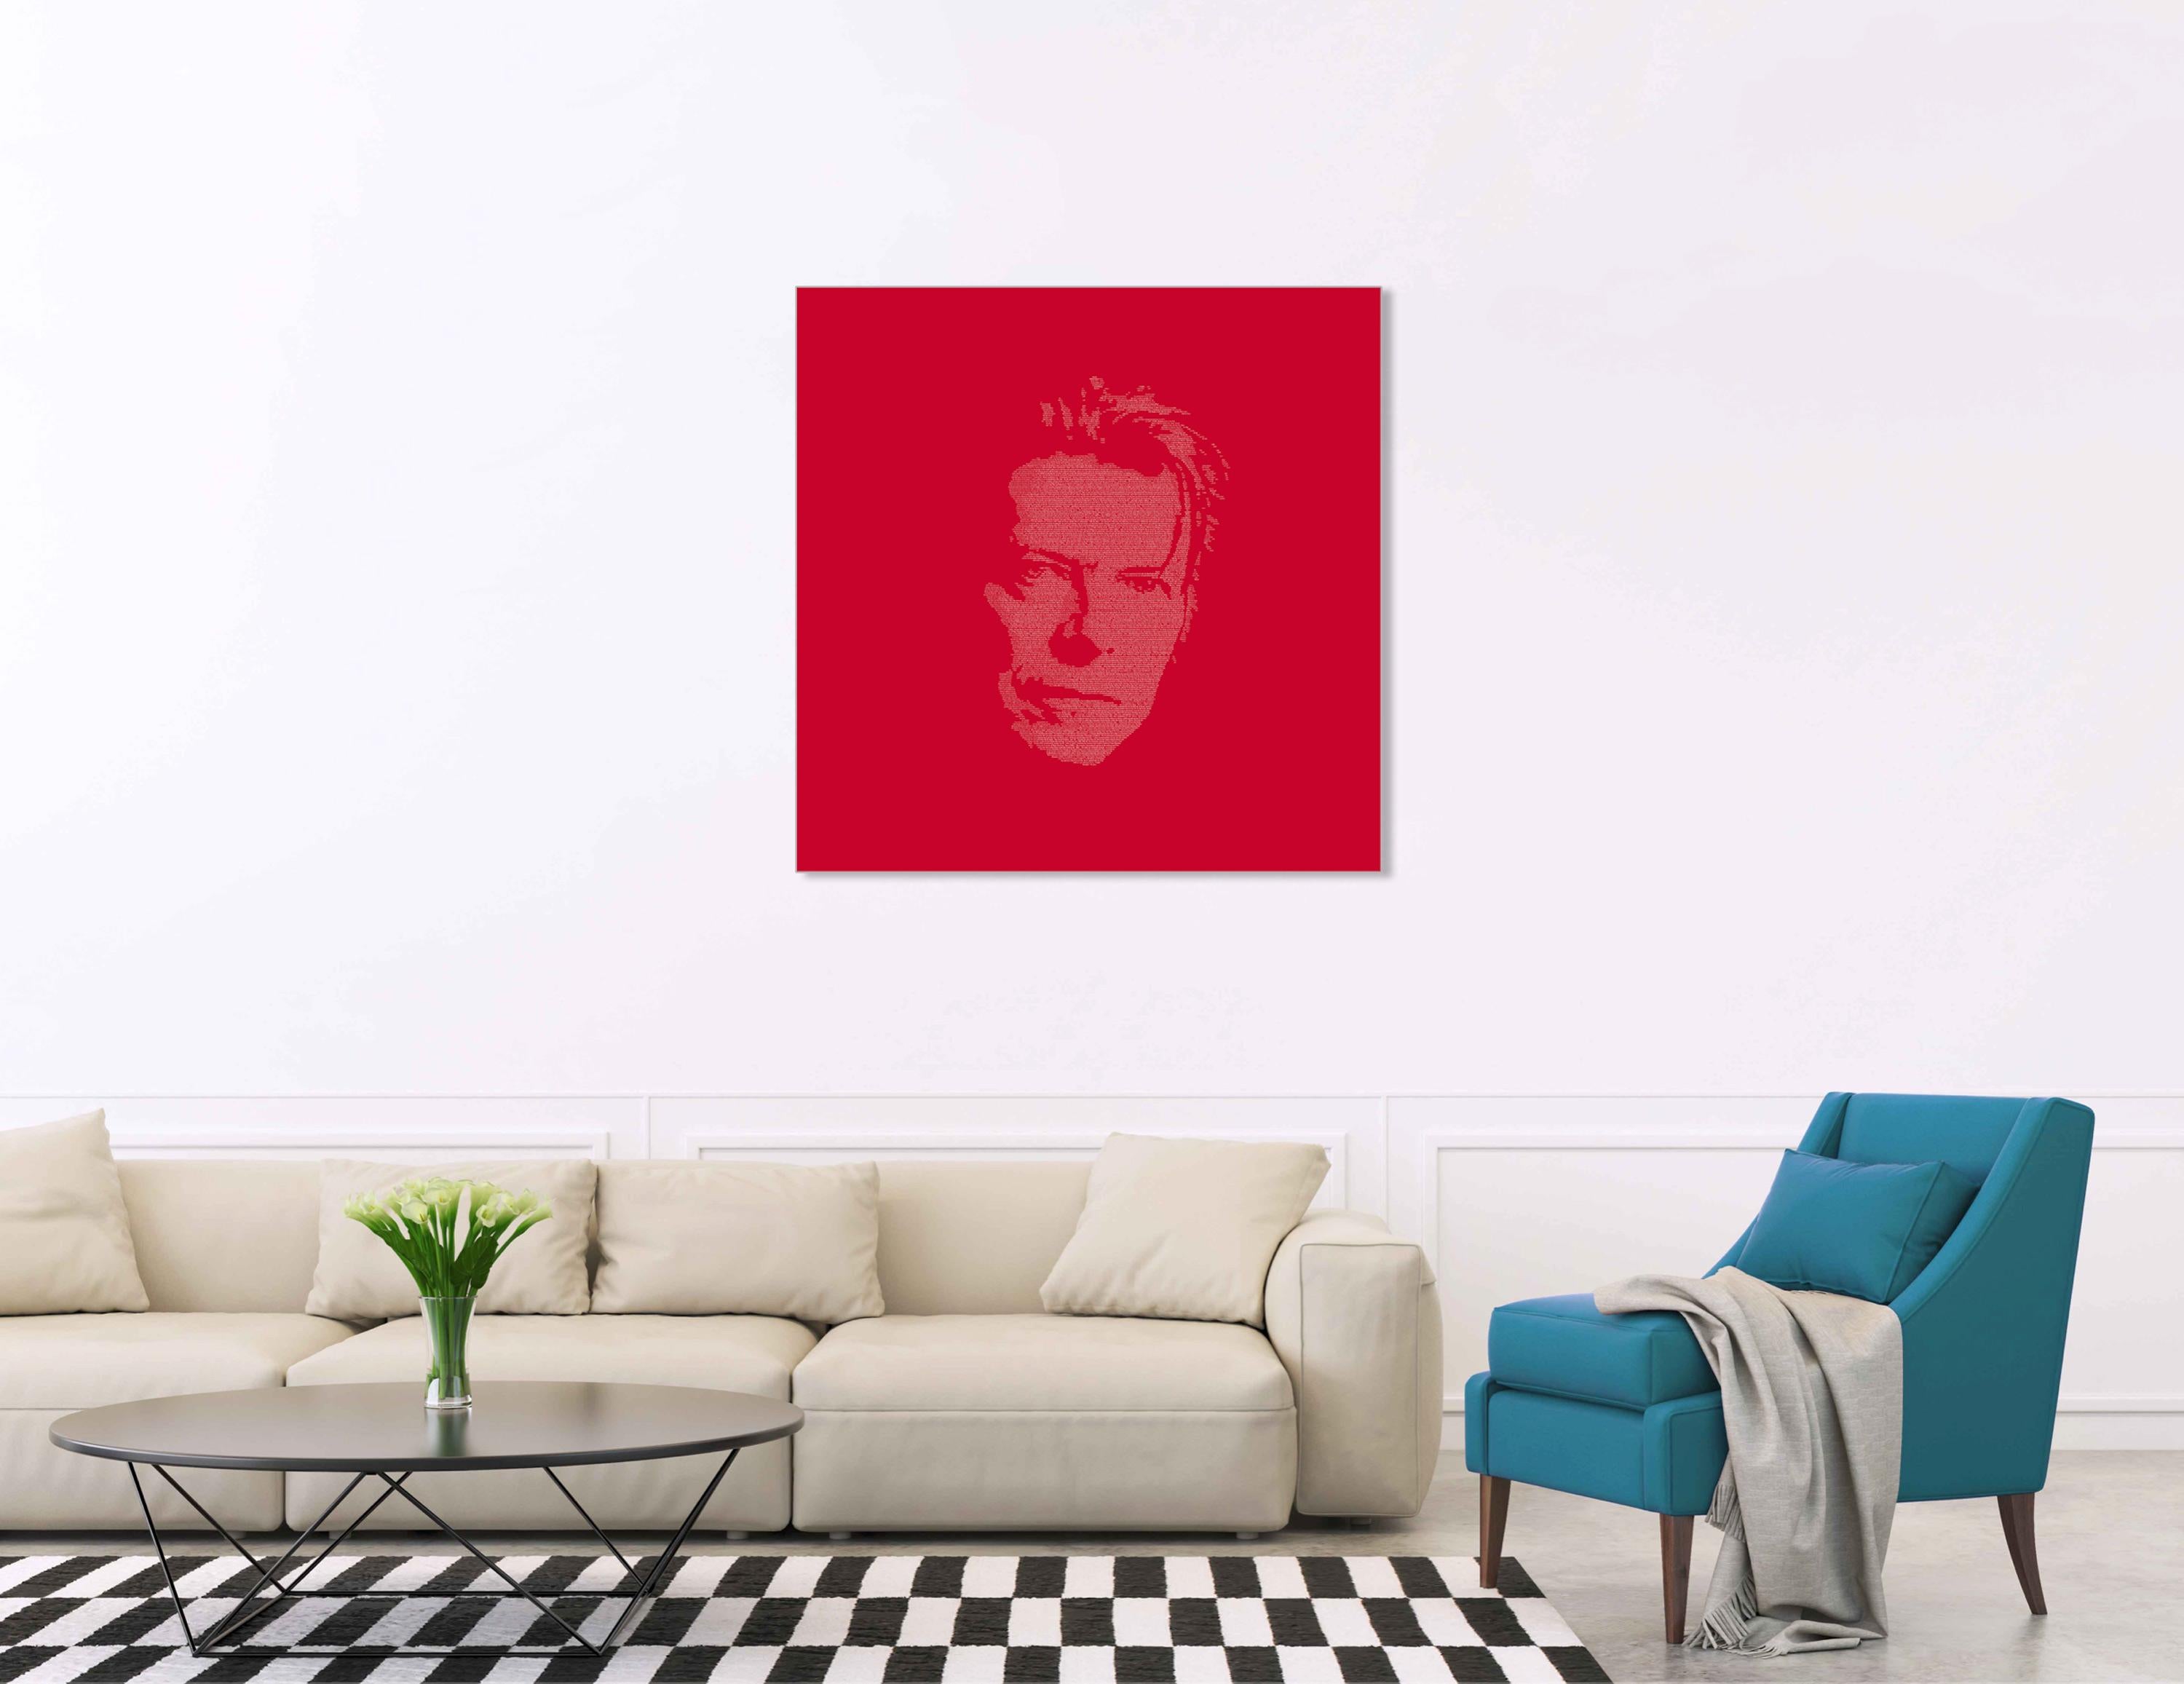 Direct printing on Plexiglass, contllage on Dibon plate, aluminium inserts at the back which allows to hang the work and also to «take off» it from the wall.
Size: 120 cm x 120 cm X 3 cm
Series of 6 copies
Weight: about 6 kg

A portrait in